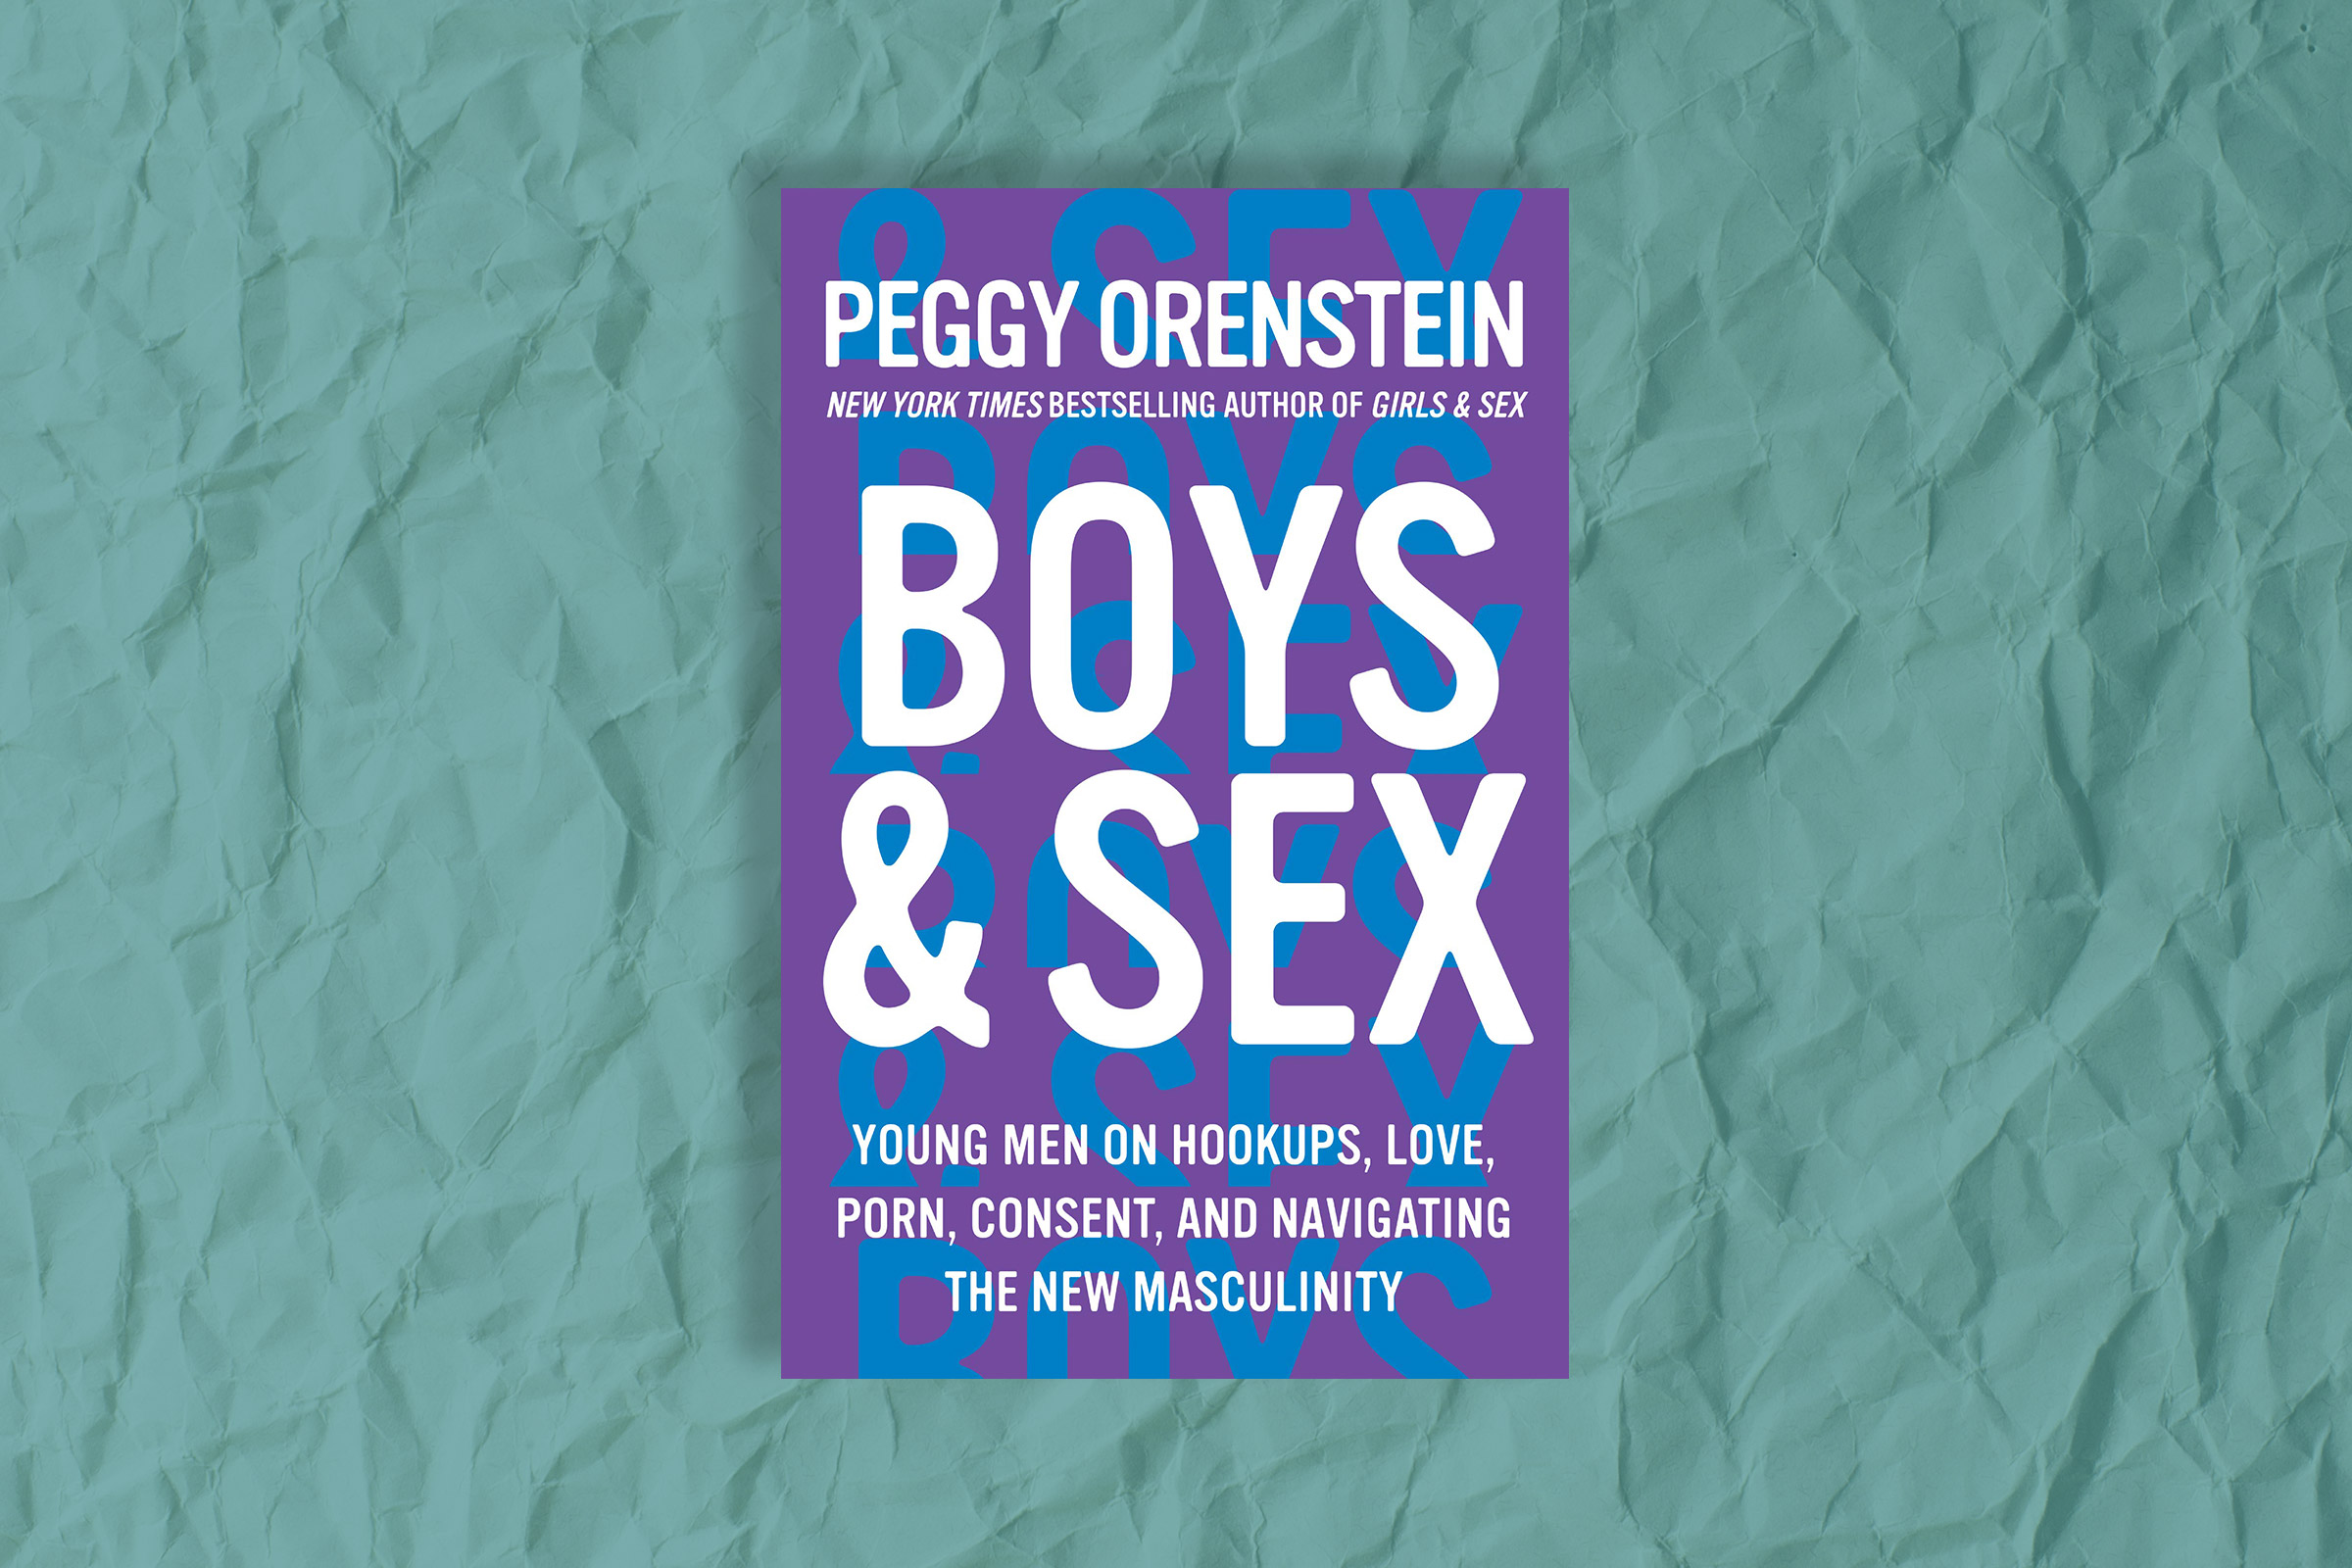 Peggy Orenstein on Her New Book 'Boys & Sex' | Time